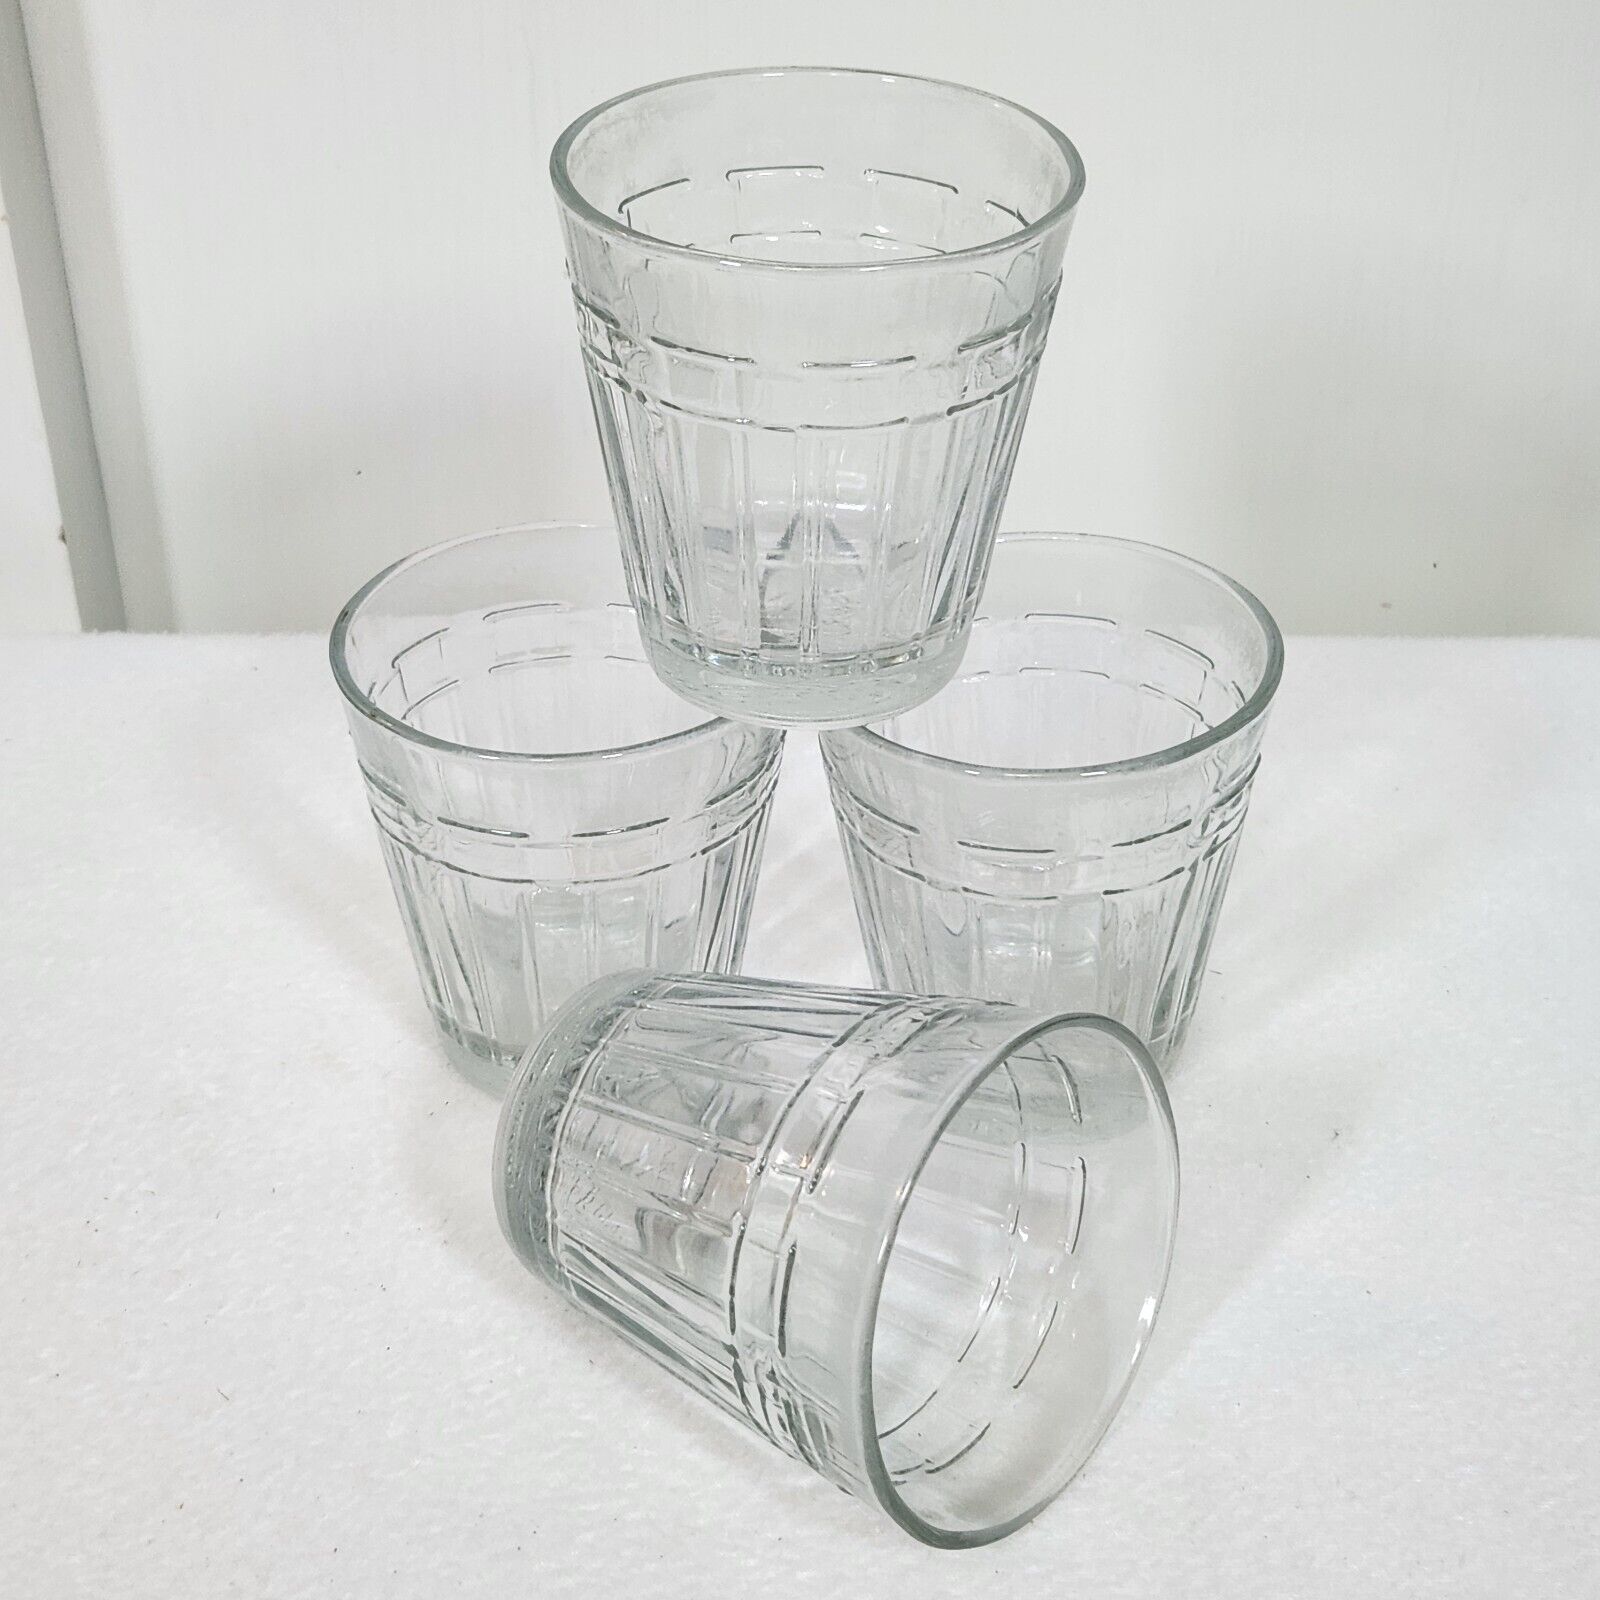 Longaberger 12 oz Glass Woven Traditions Tumblers~Set of 4 USA CLOUDY AS SHOWN